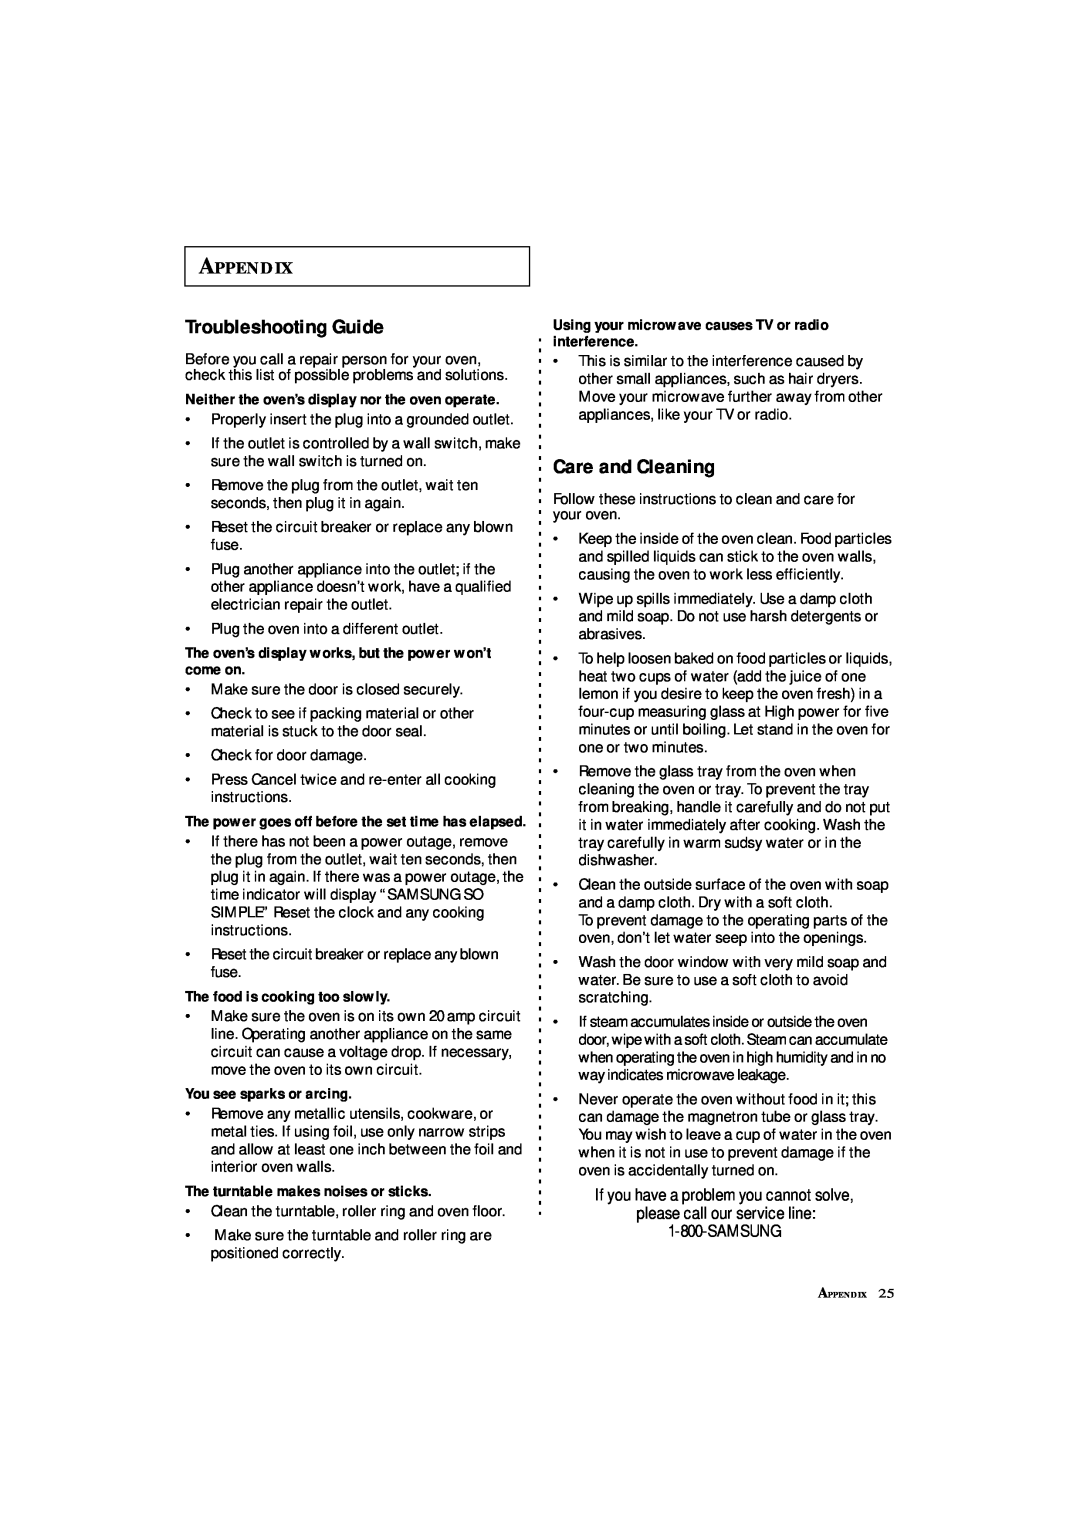 Samsung MS8899S manual Troubleshooting Guide, Care and Cleaning, Appendix 